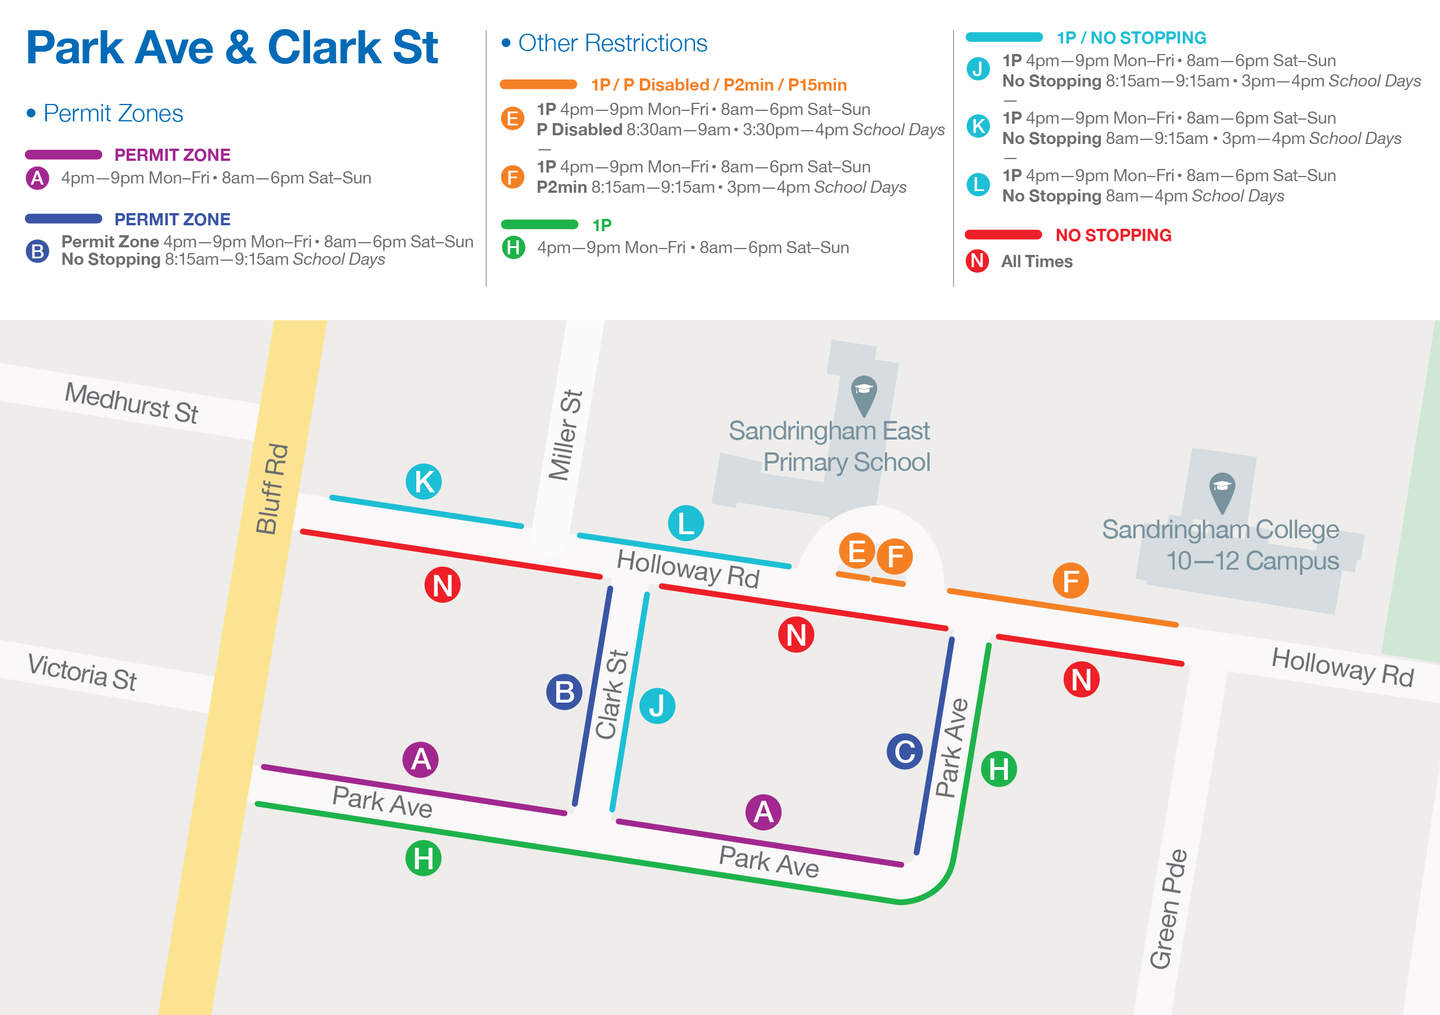 Netball Centre parking restrictions on Park Avenue and Clarke Street